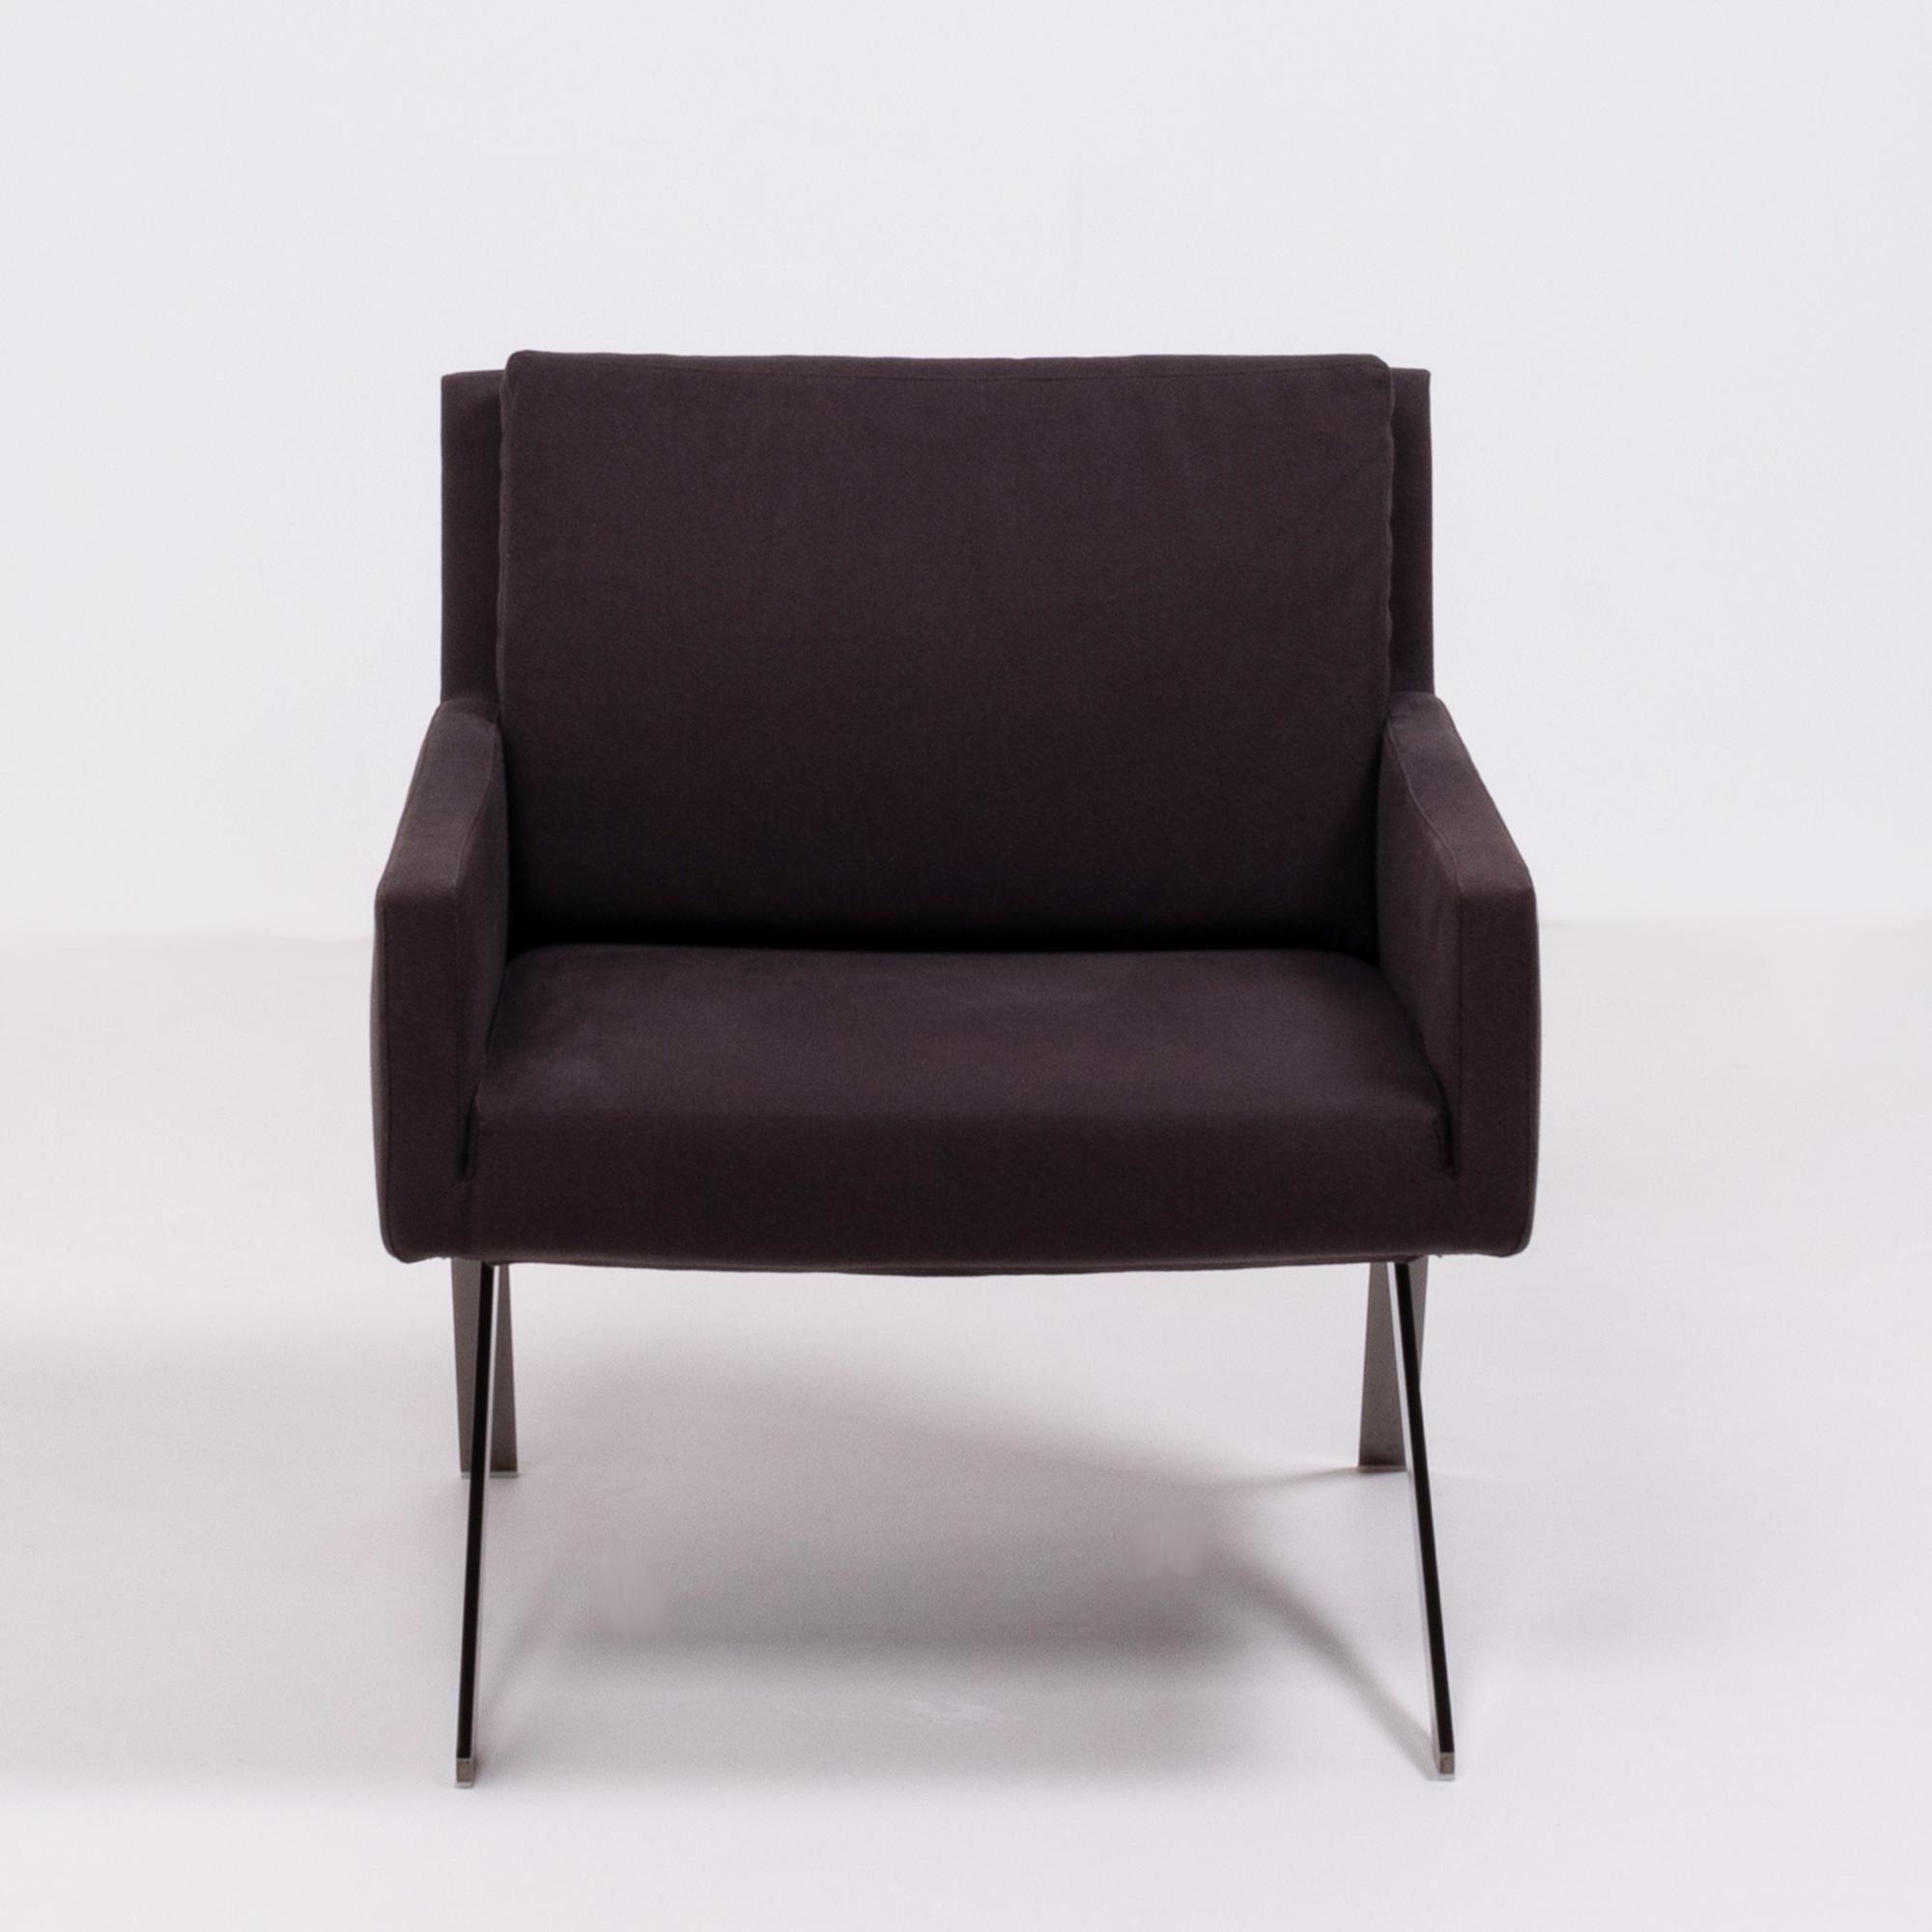 Designed by Vincent Van Duysen for B&B Italia, the Theo armchair has a sleek, modern Silhouette.
Featuring a tubular steel frame, the chair has angular steel legs and side panel detailing, while the seat is upholstered in chocolate brown fabric.
A